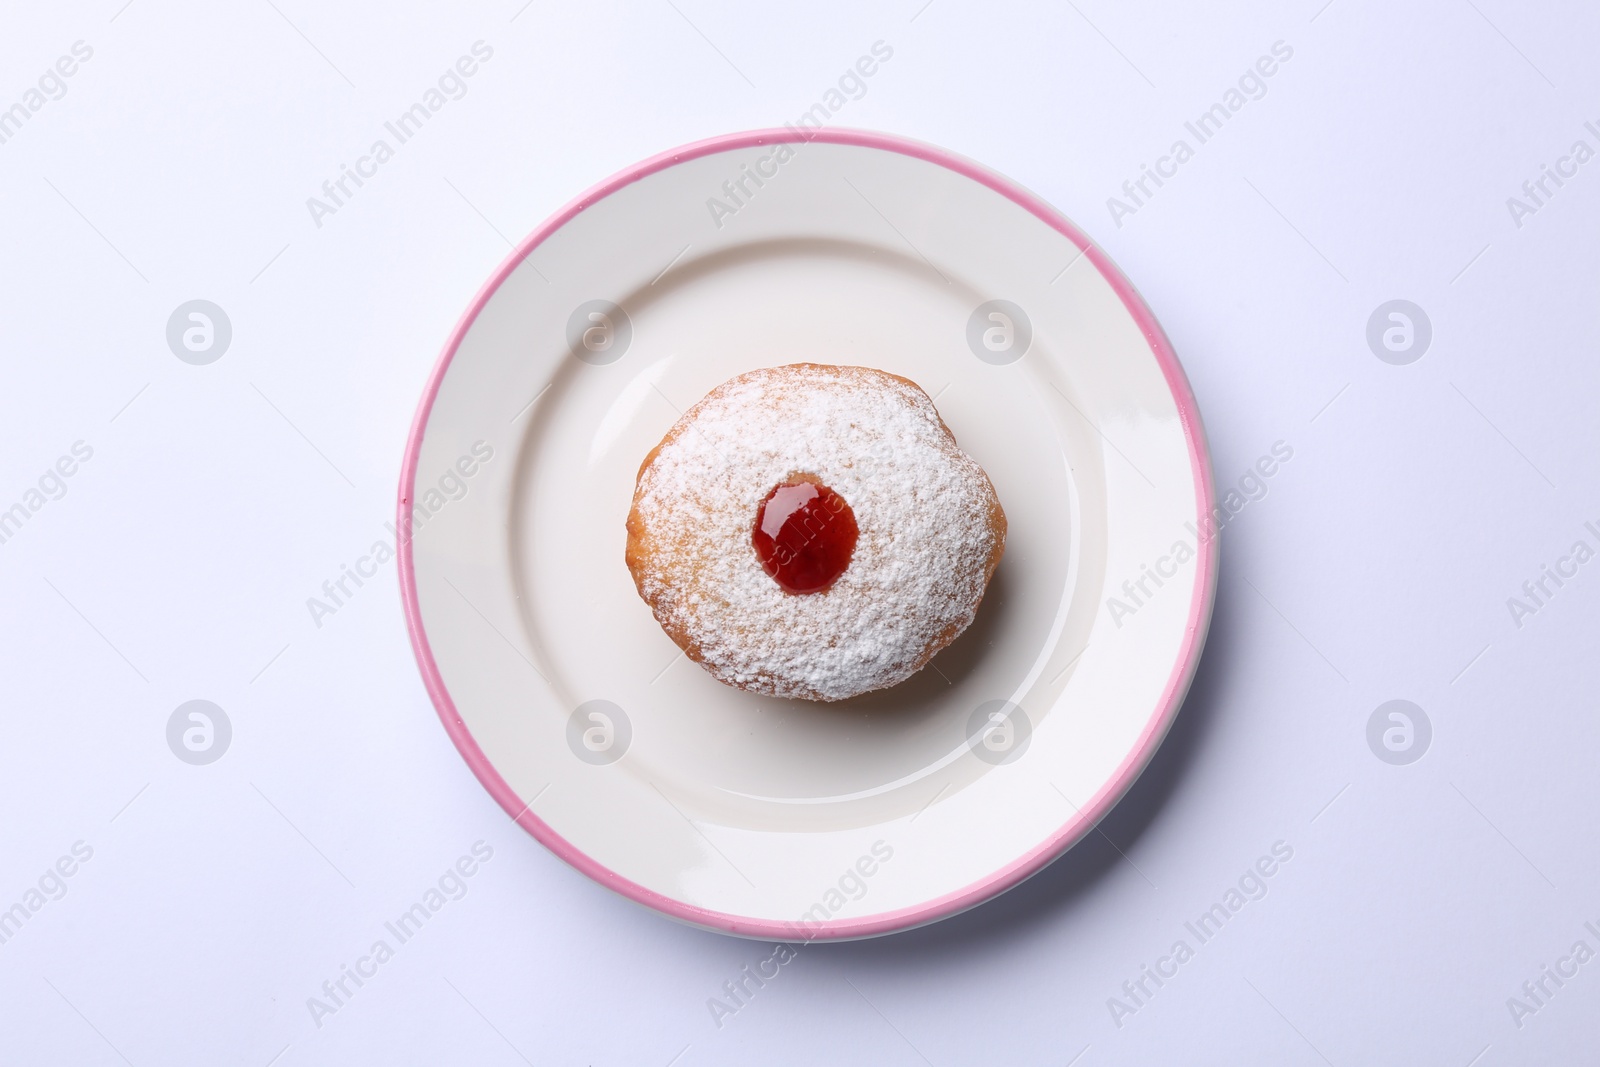 Photo of Hanukkah donut with jelly and powdered sugar on white background, top view